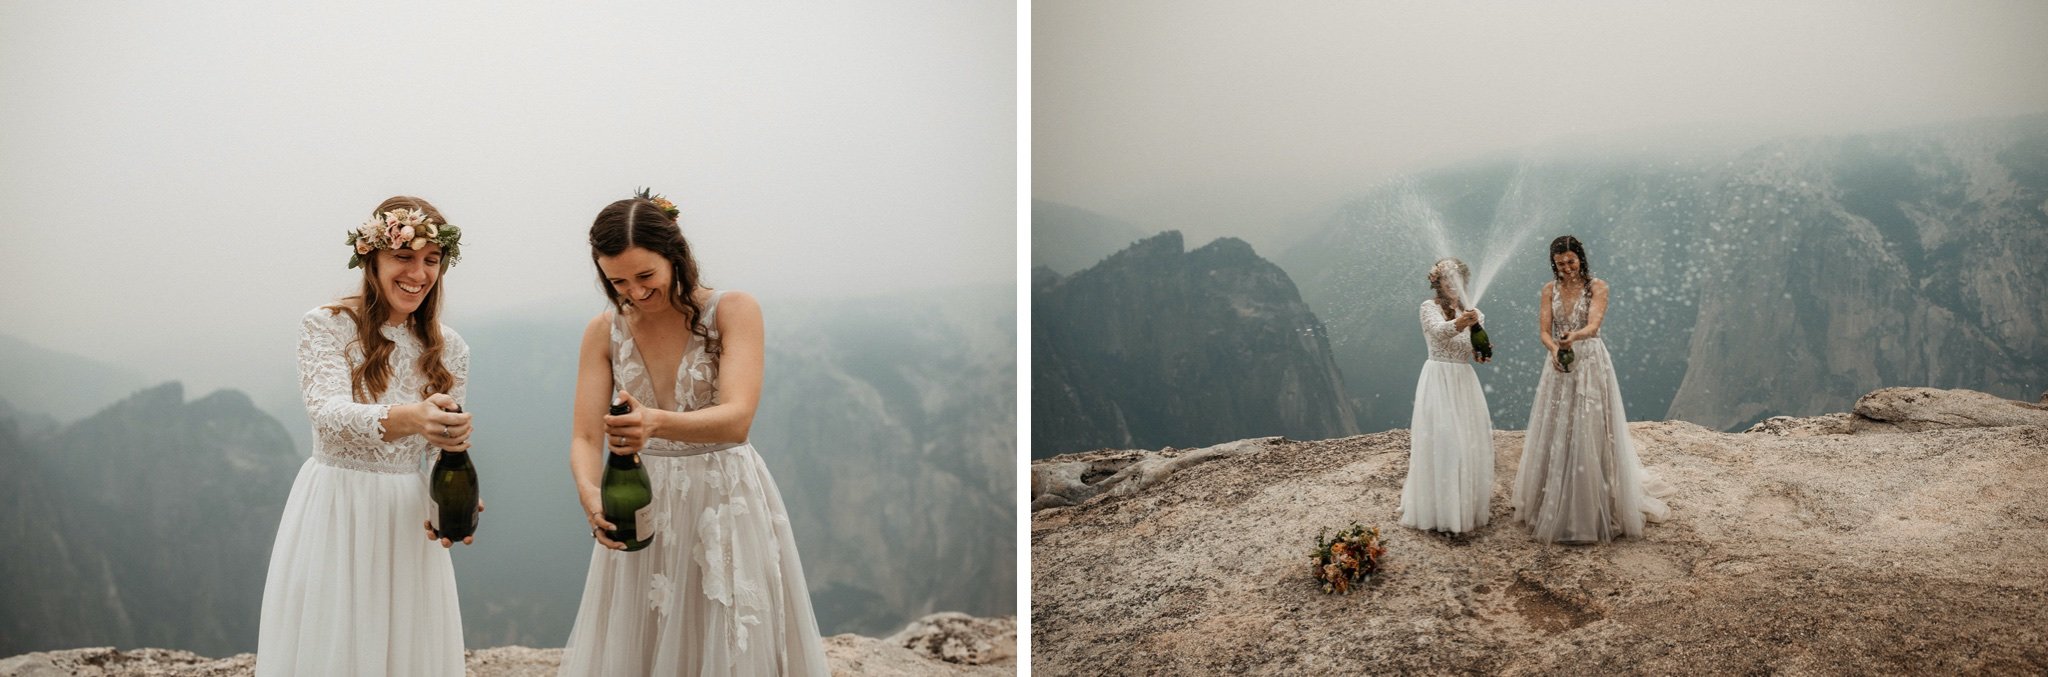 Yosemite National Park Elopement with Two Brides-Will Khoury42.jpg